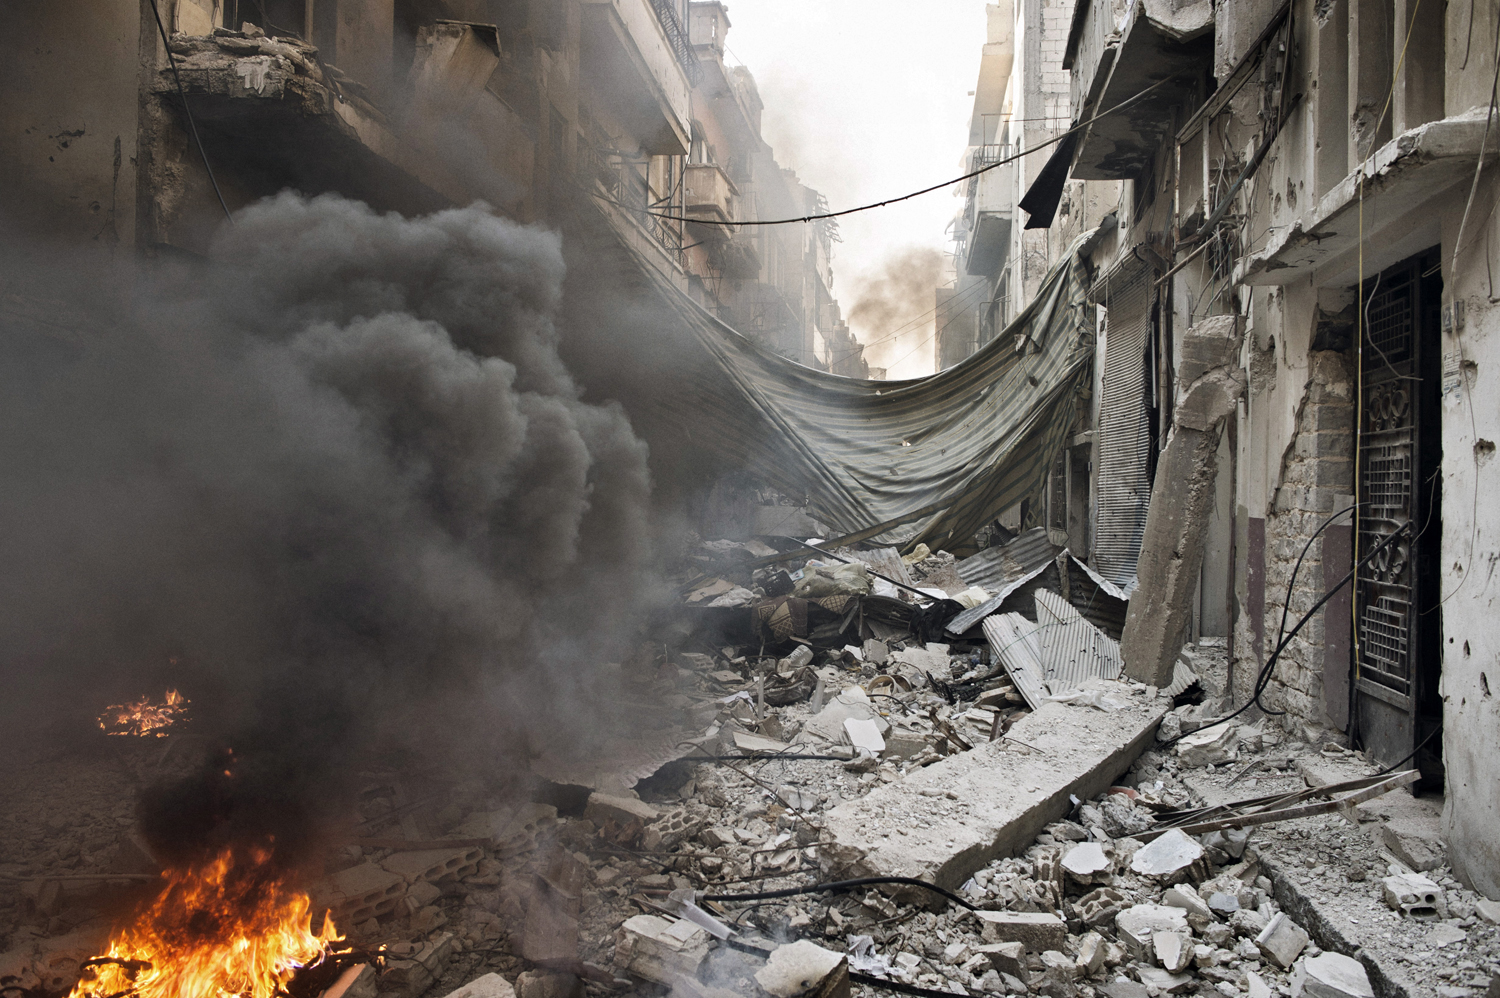 A street in the Qabaris neighborhood of Homs lies in ruins. Government soldiers use small fires to melt the plastic from cables and wires stripped from destroyed buildings. They say it is to prevent the wires from being used for improvised explosive devices, but the copper within can also be sold for cash. May 12, 2014.